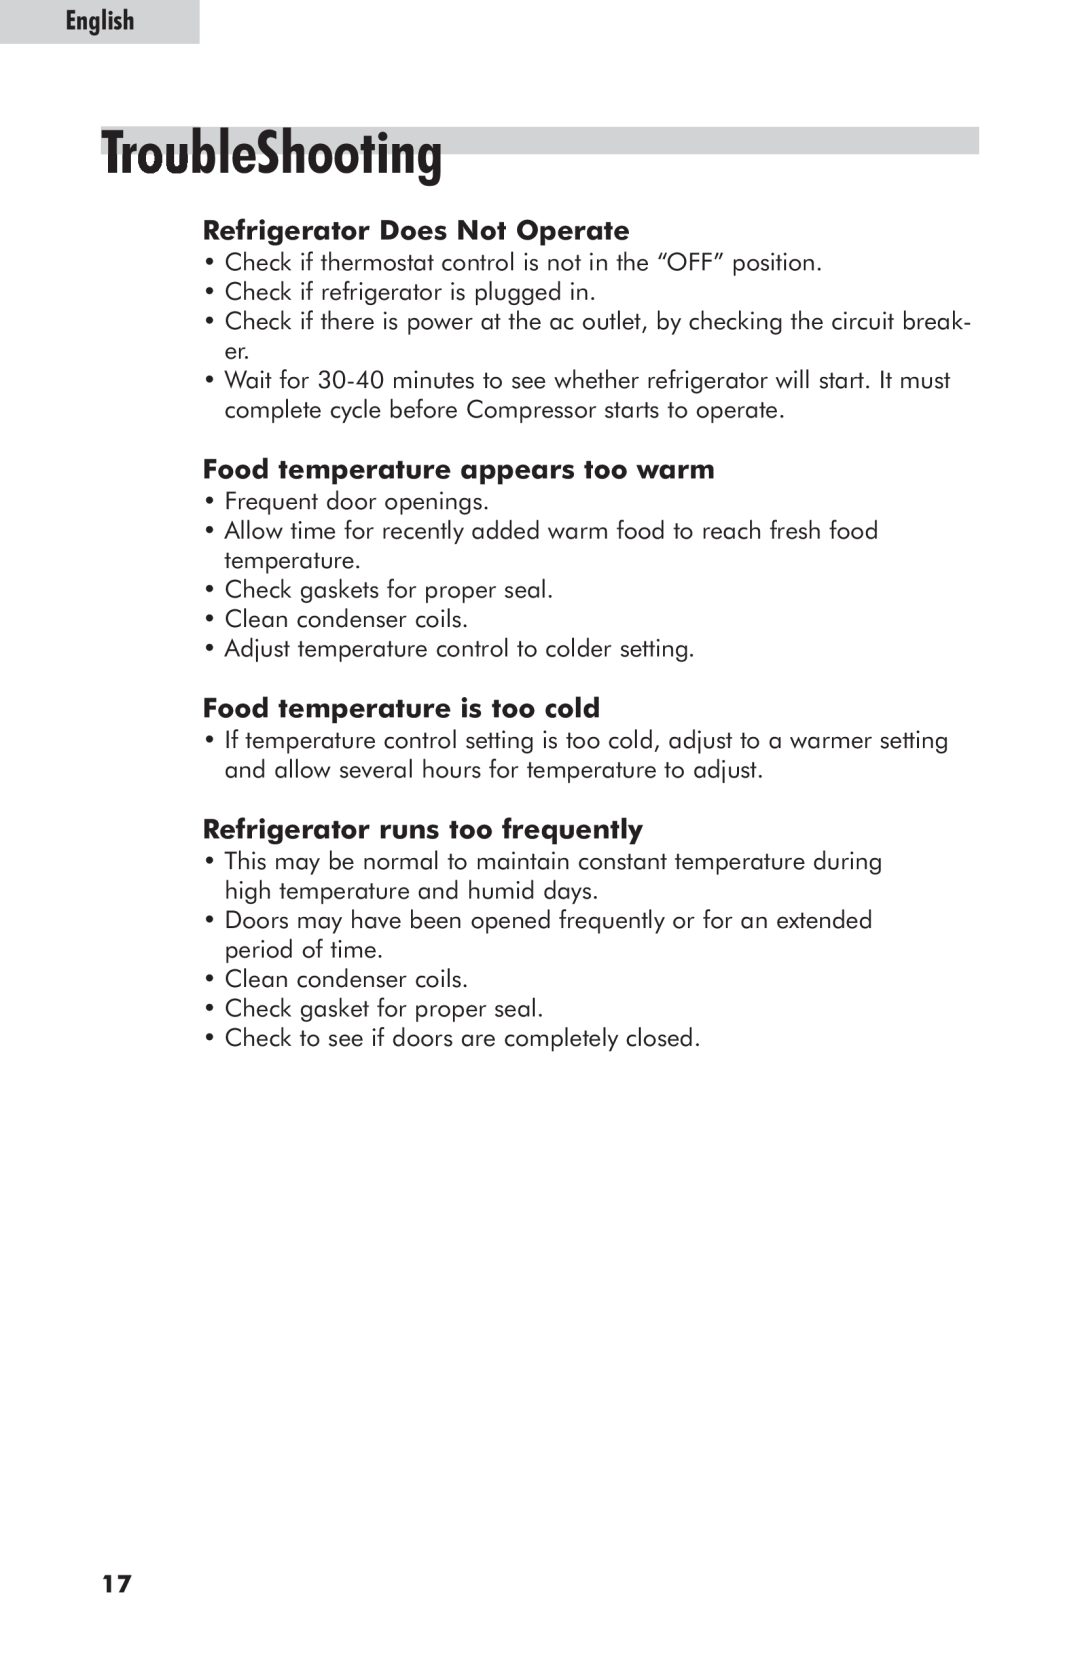 Haier HRE10WNAWW user manual TroubleShooting, Refrigerator Does Not Operate, Food temperature appears too warm, English 